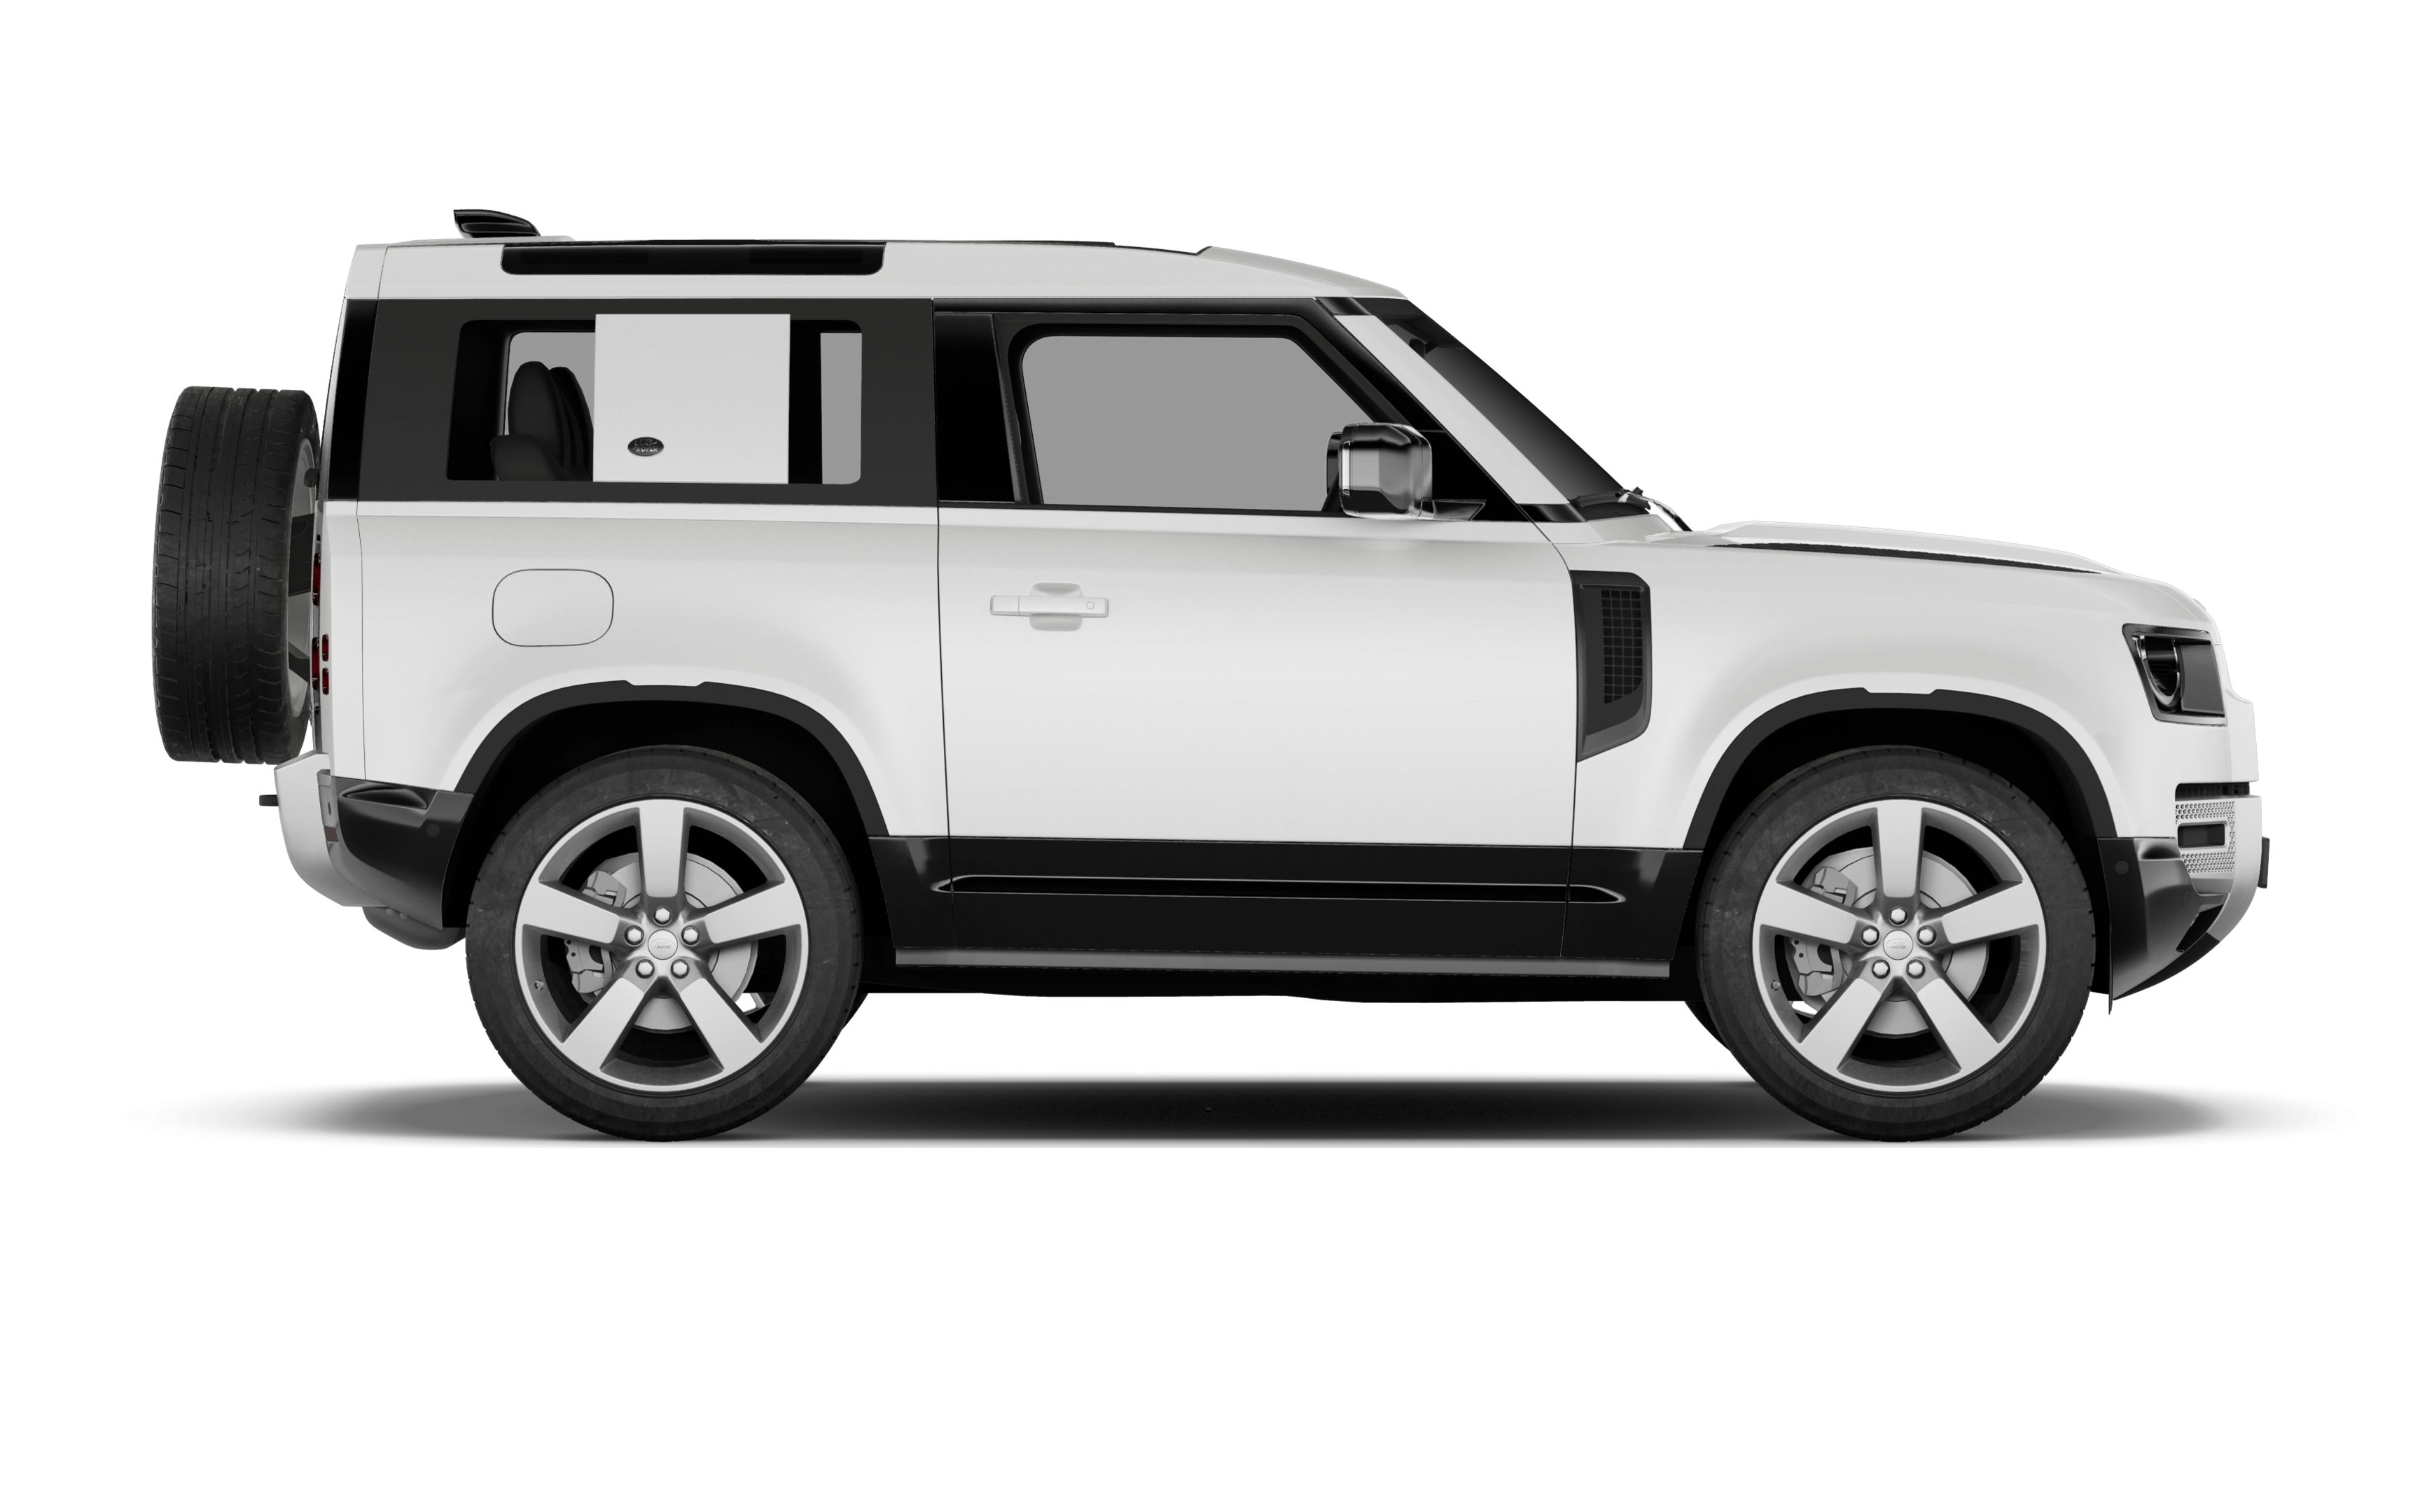 Land rover defender 110 3.0 d250 hard top auto [3 seat]